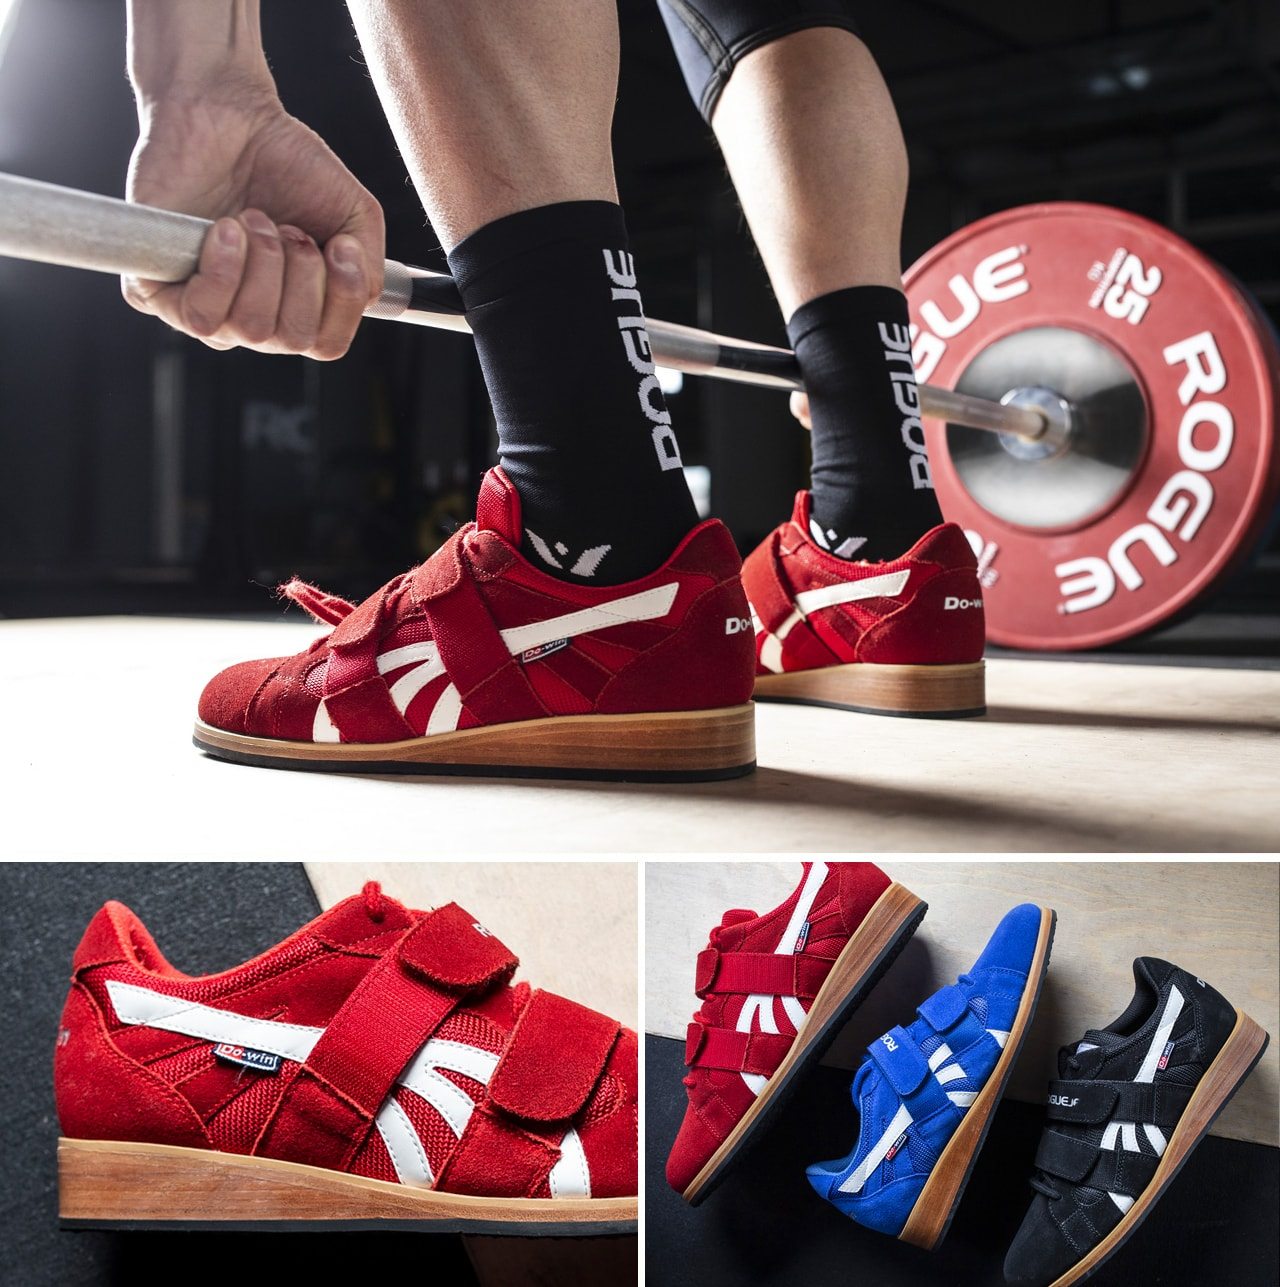 Just Launched: Do-Win Classic Lifter 